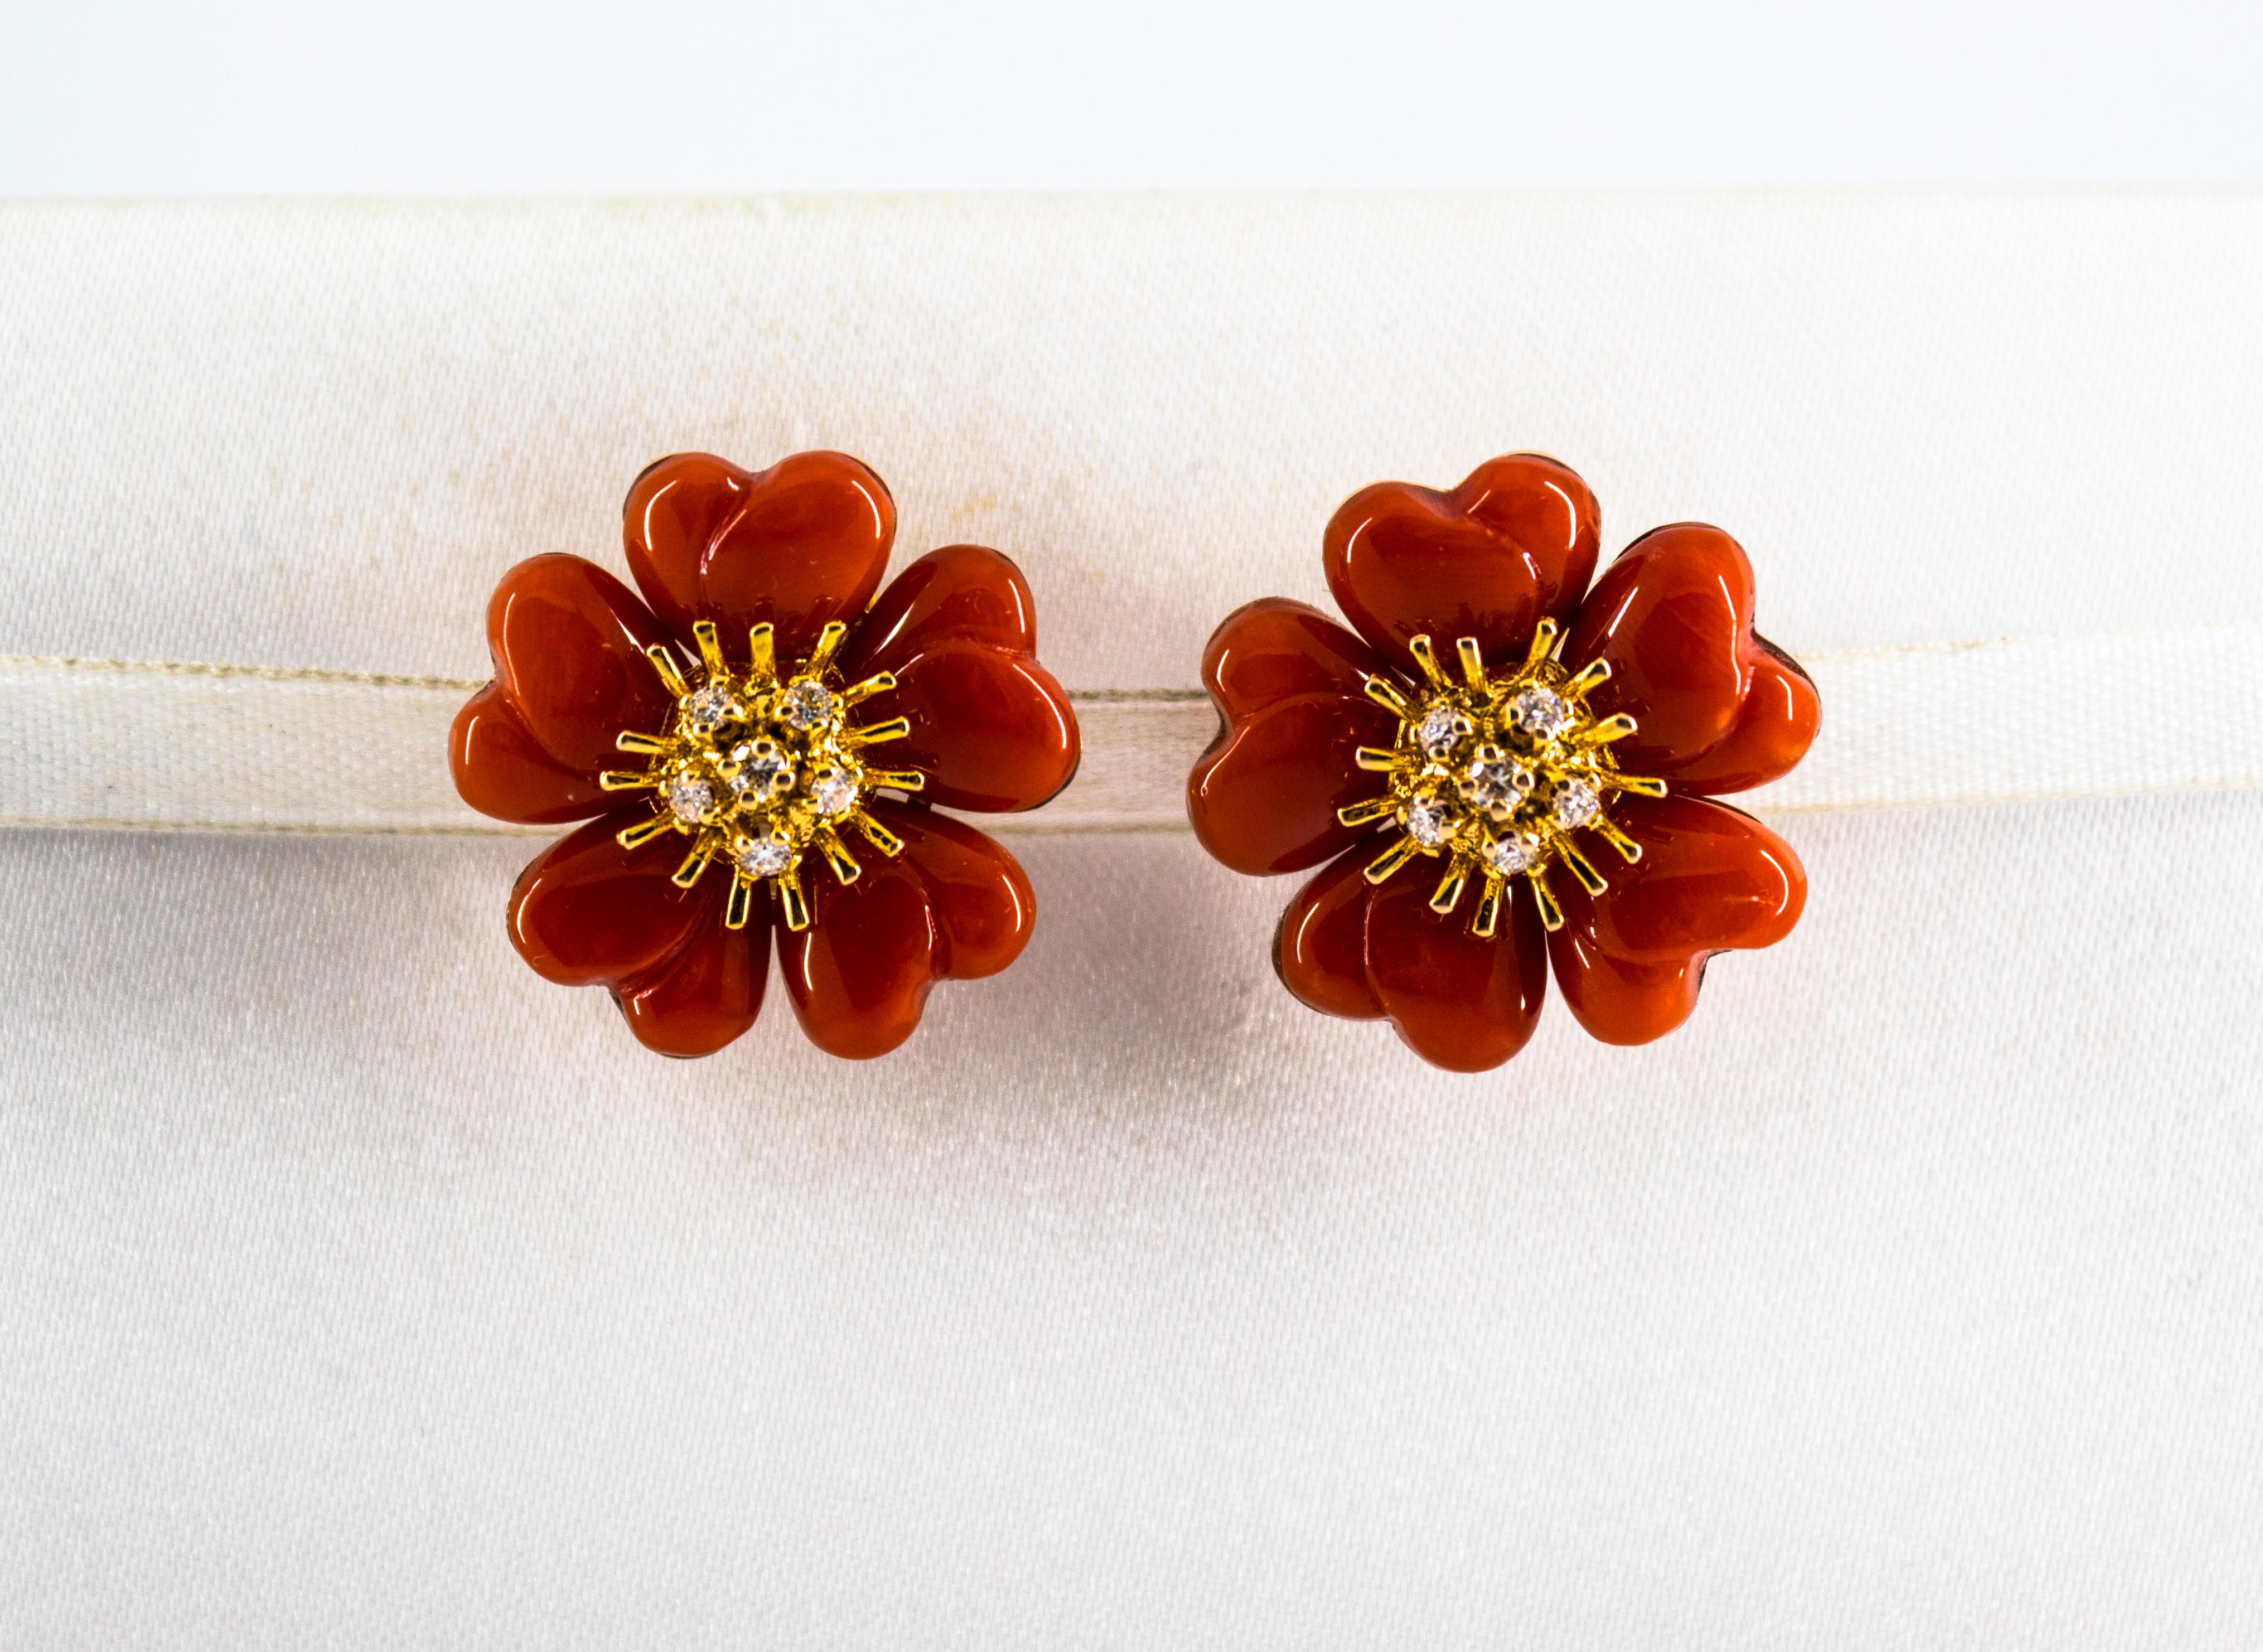 These Earrings are made of 14K Yellow Gold.
These Earrings have 0.45 Carats of White Diamonds.
These Earrings have Mediterranean (Sardinia, Italy) Red Coral.
These Earrings are available also in White Coral, Pink Coral, Turquoise or Lapis